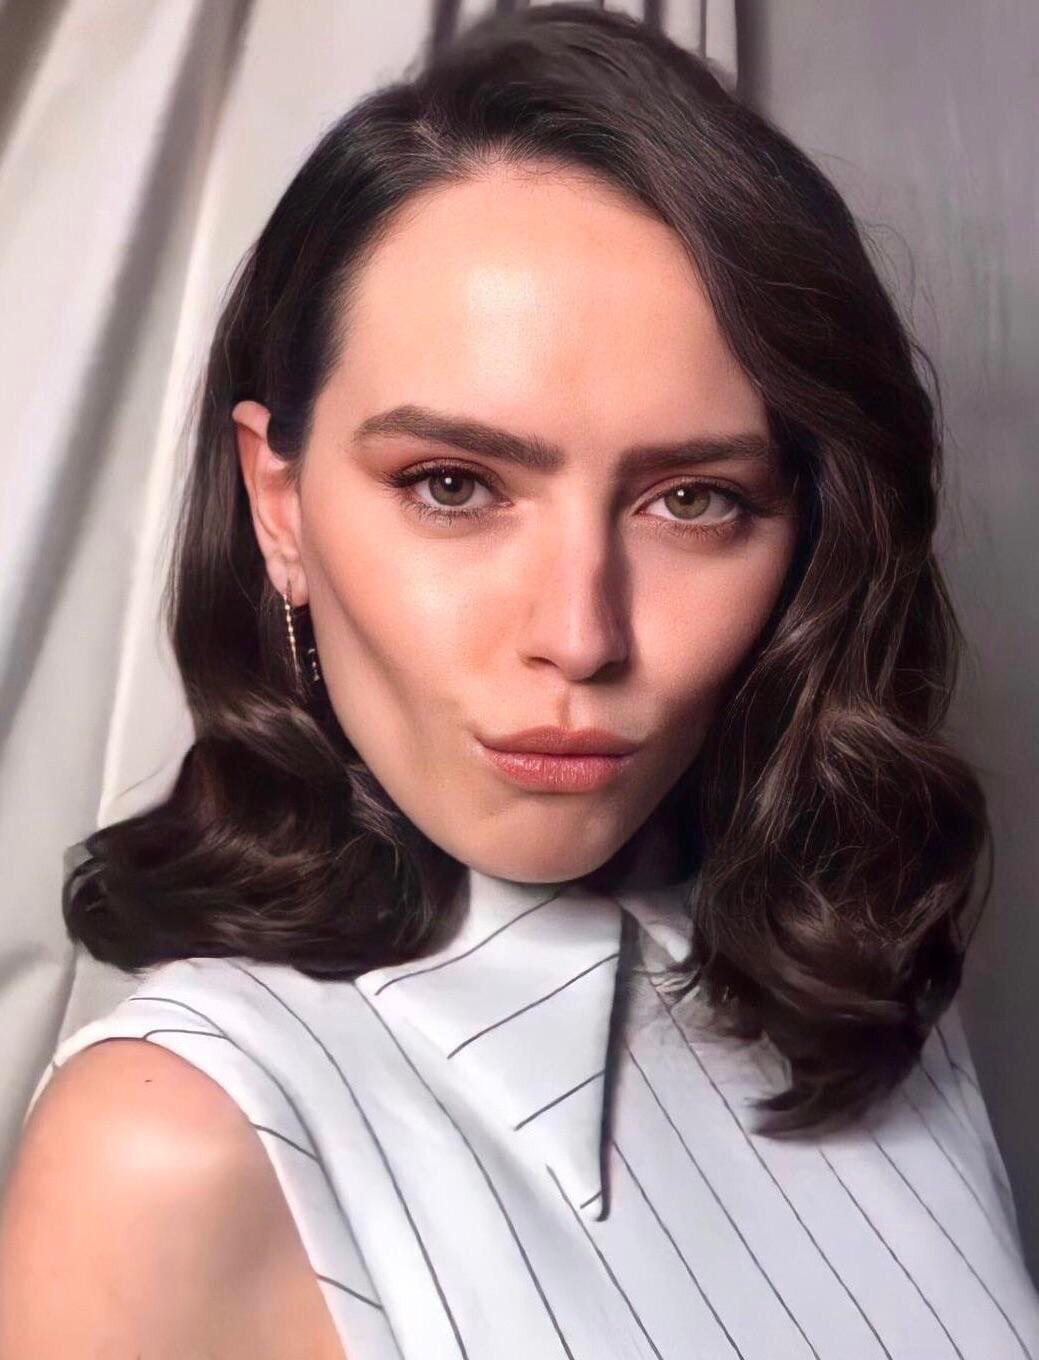 Id love to cover Daisy Ridley in cum